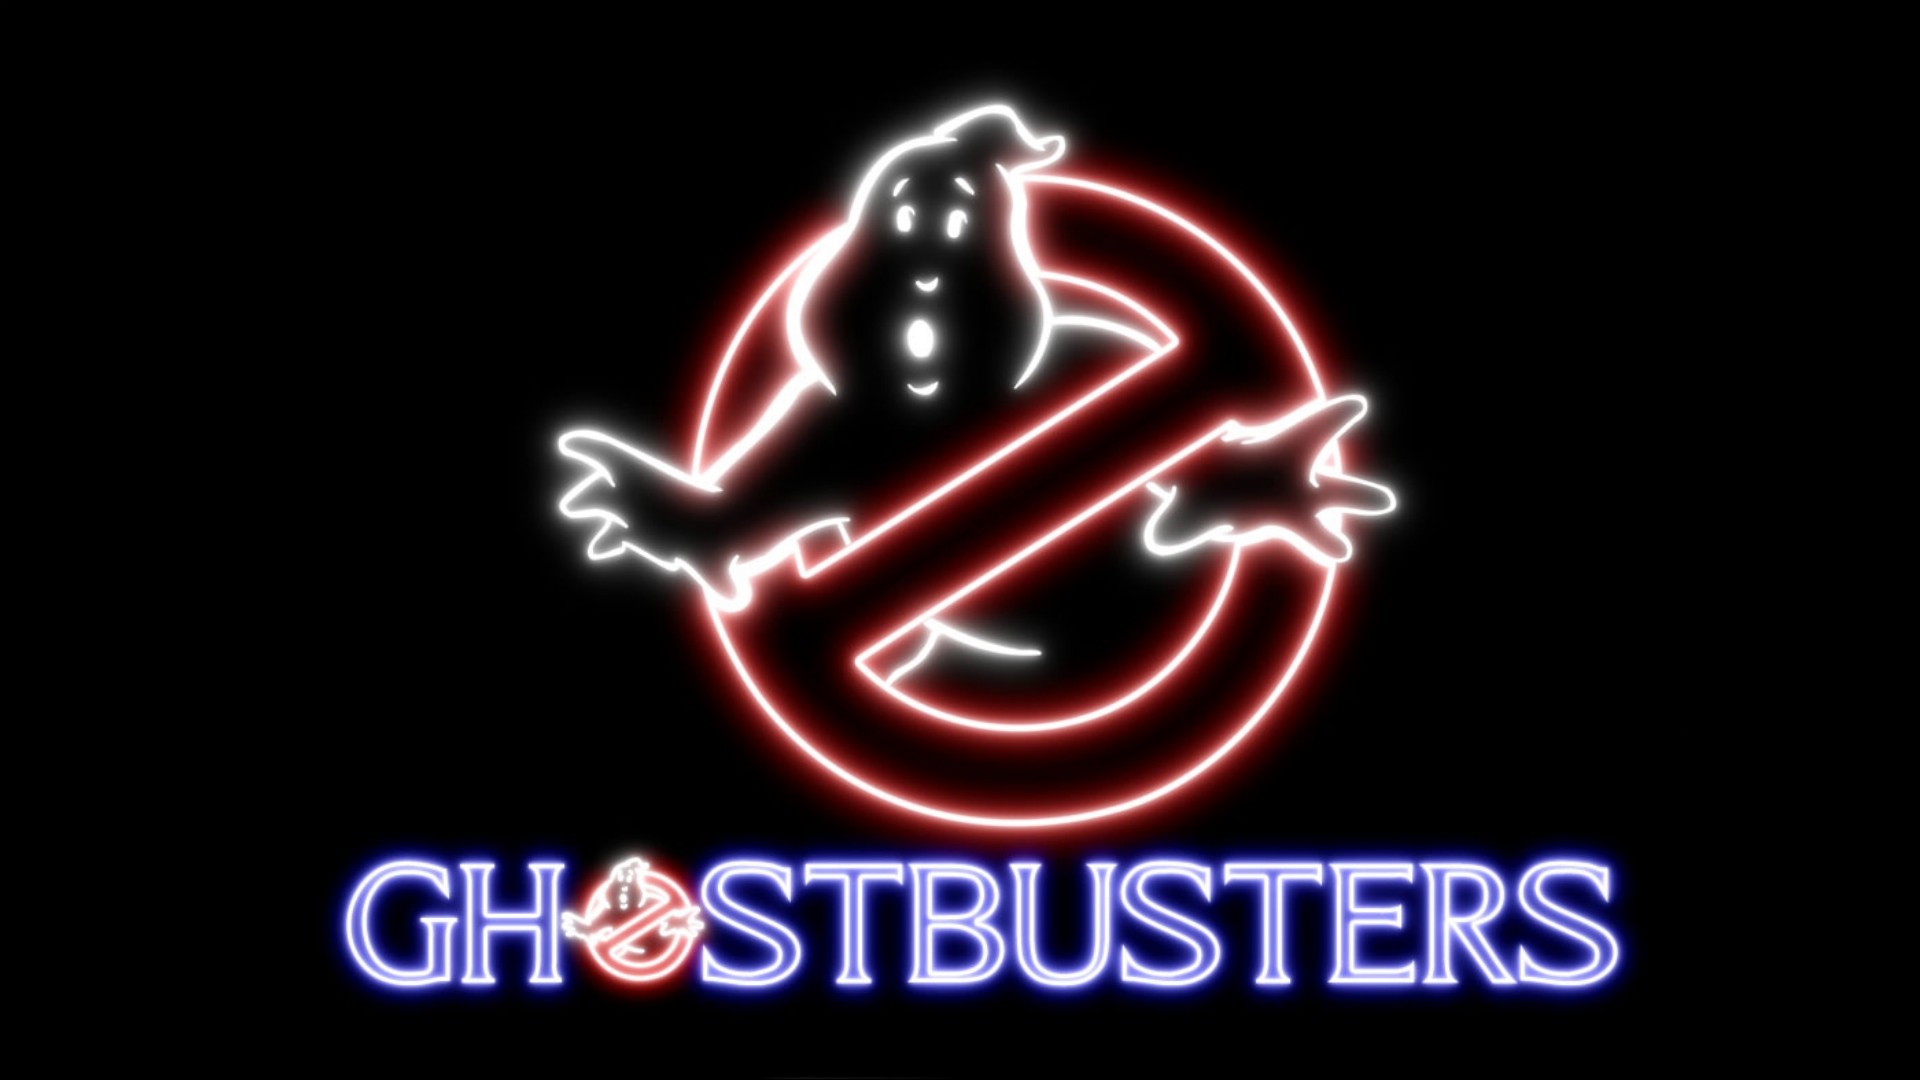 Ghostbusters wallpapers